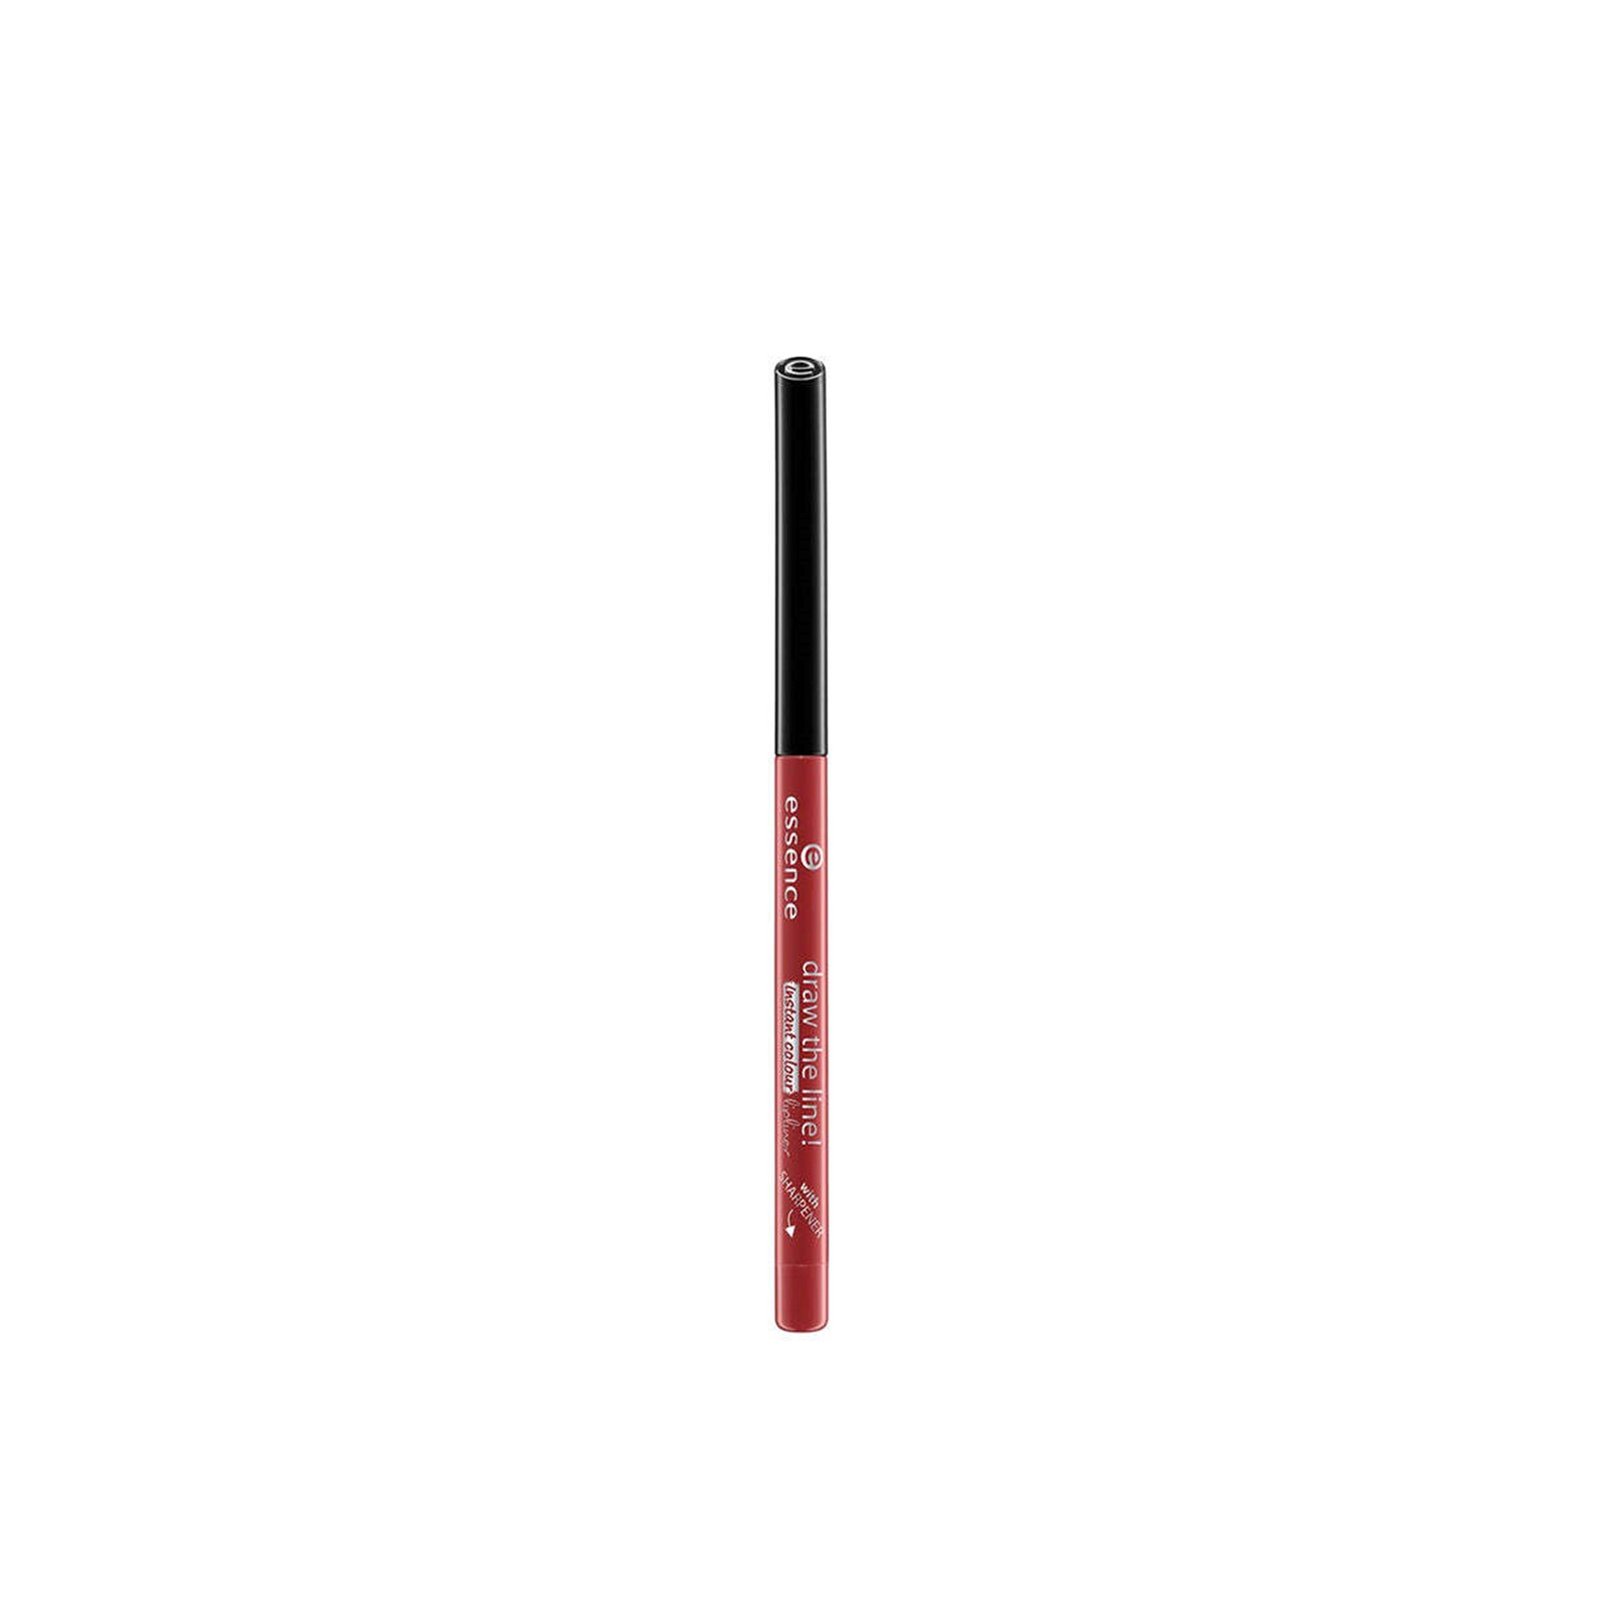 essence Draw The Line! Instant Colour Lipliner 14 Catch Up Red 0.25g (0.009 oz)